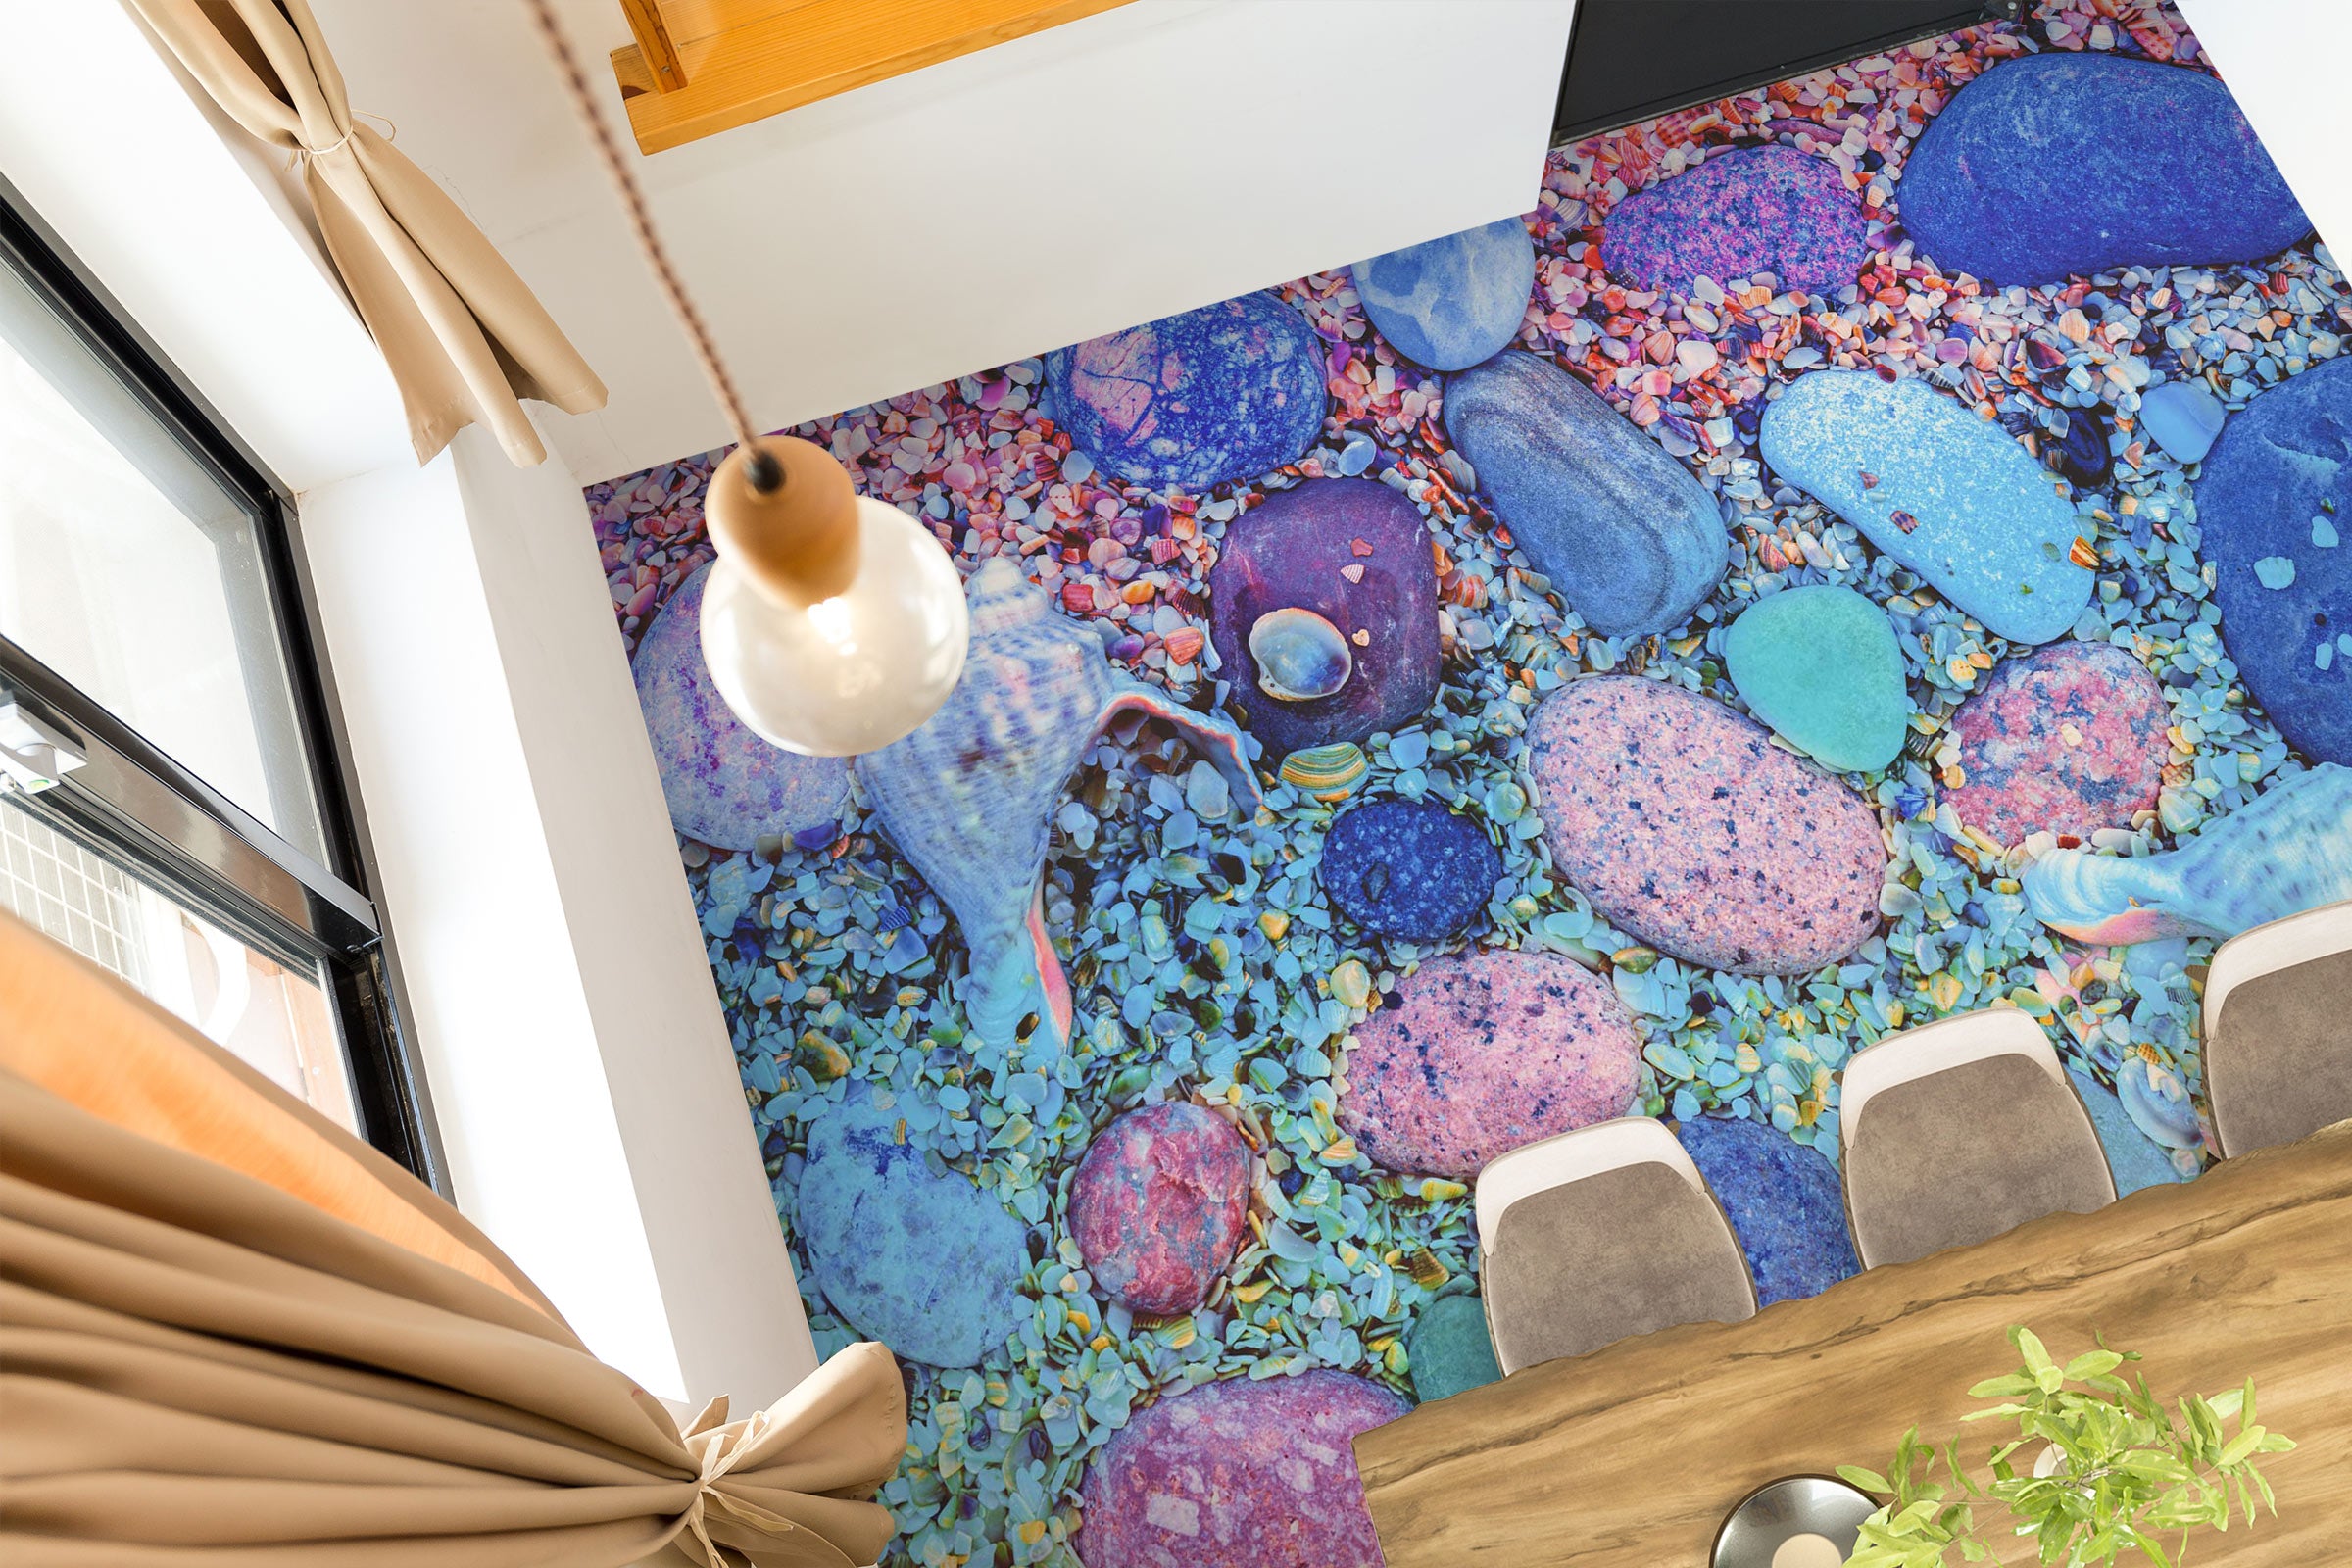 3D Psychedelic Colored Stones 1064 Floor Mural  Wallpaper Murals Self-Adhesive Removable Print Epoxy